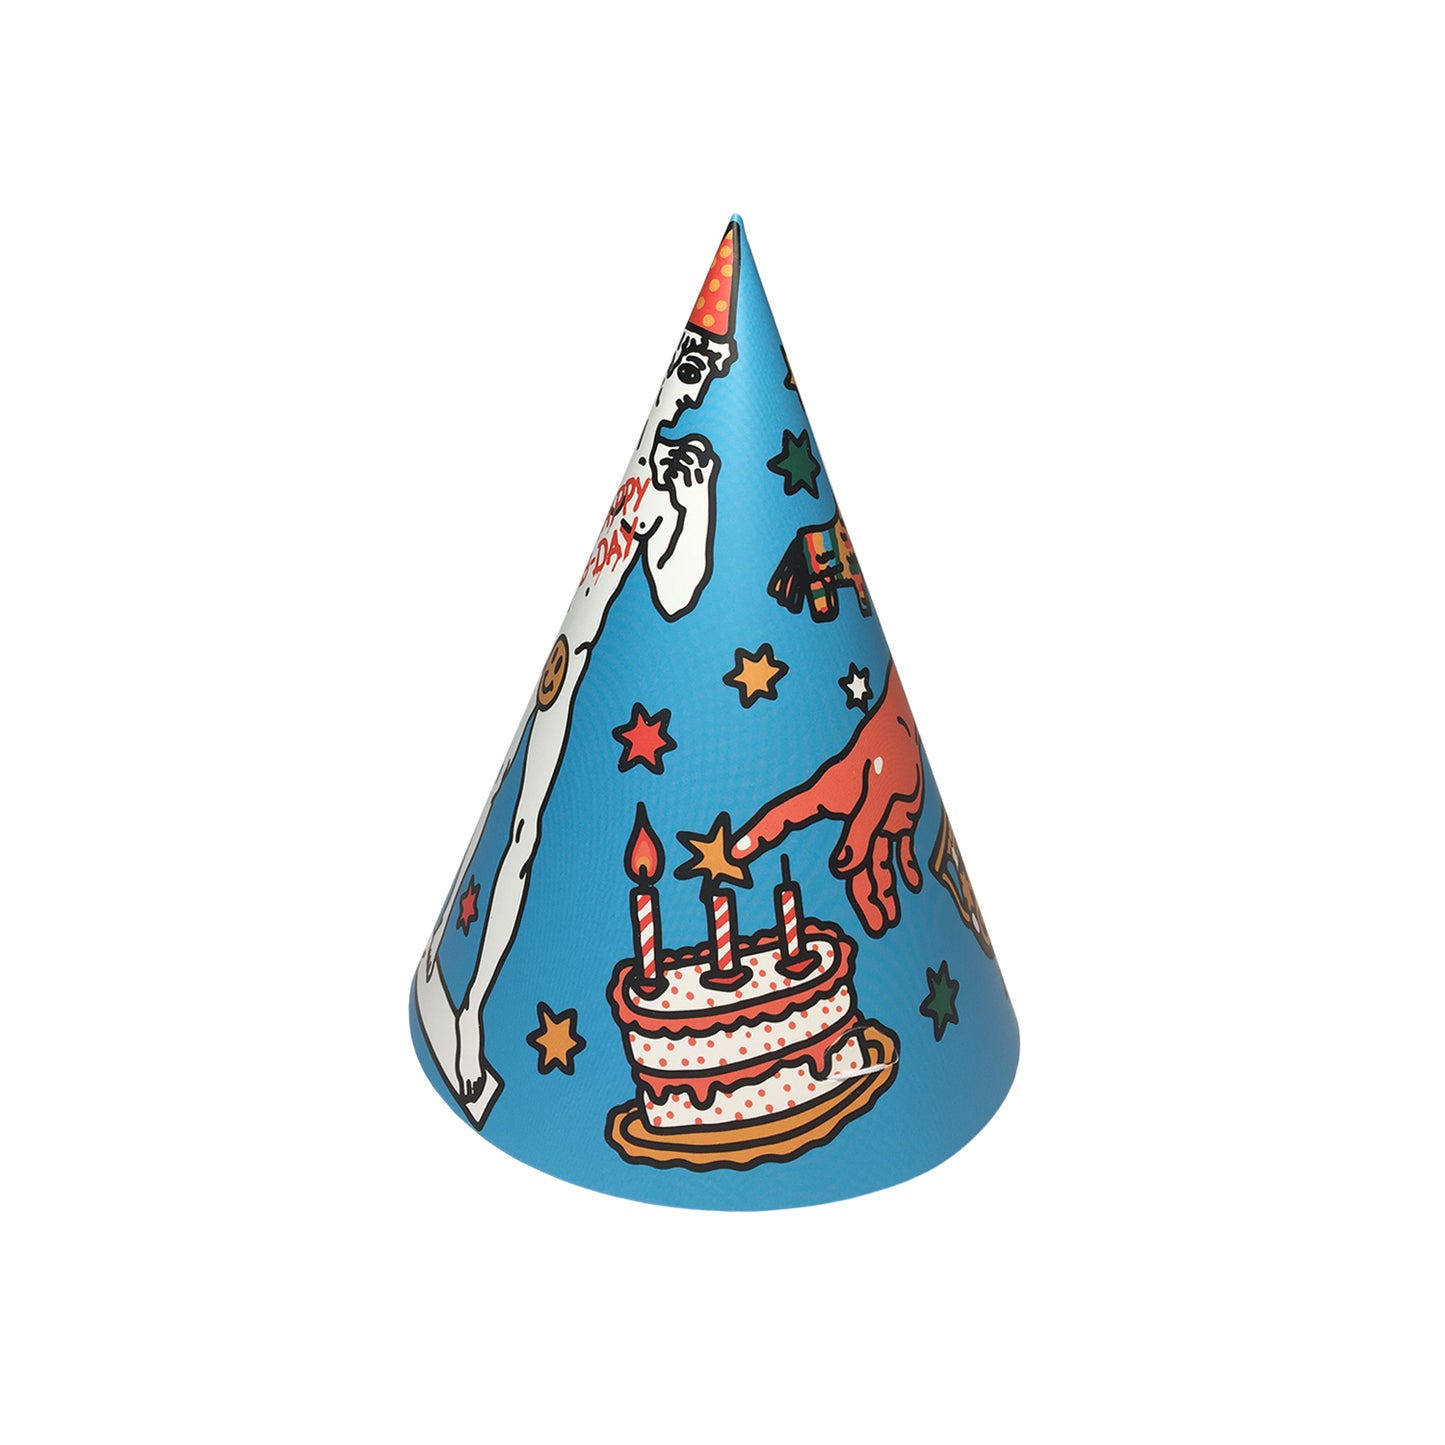 THE REBIRTHDAY PARTY HATS